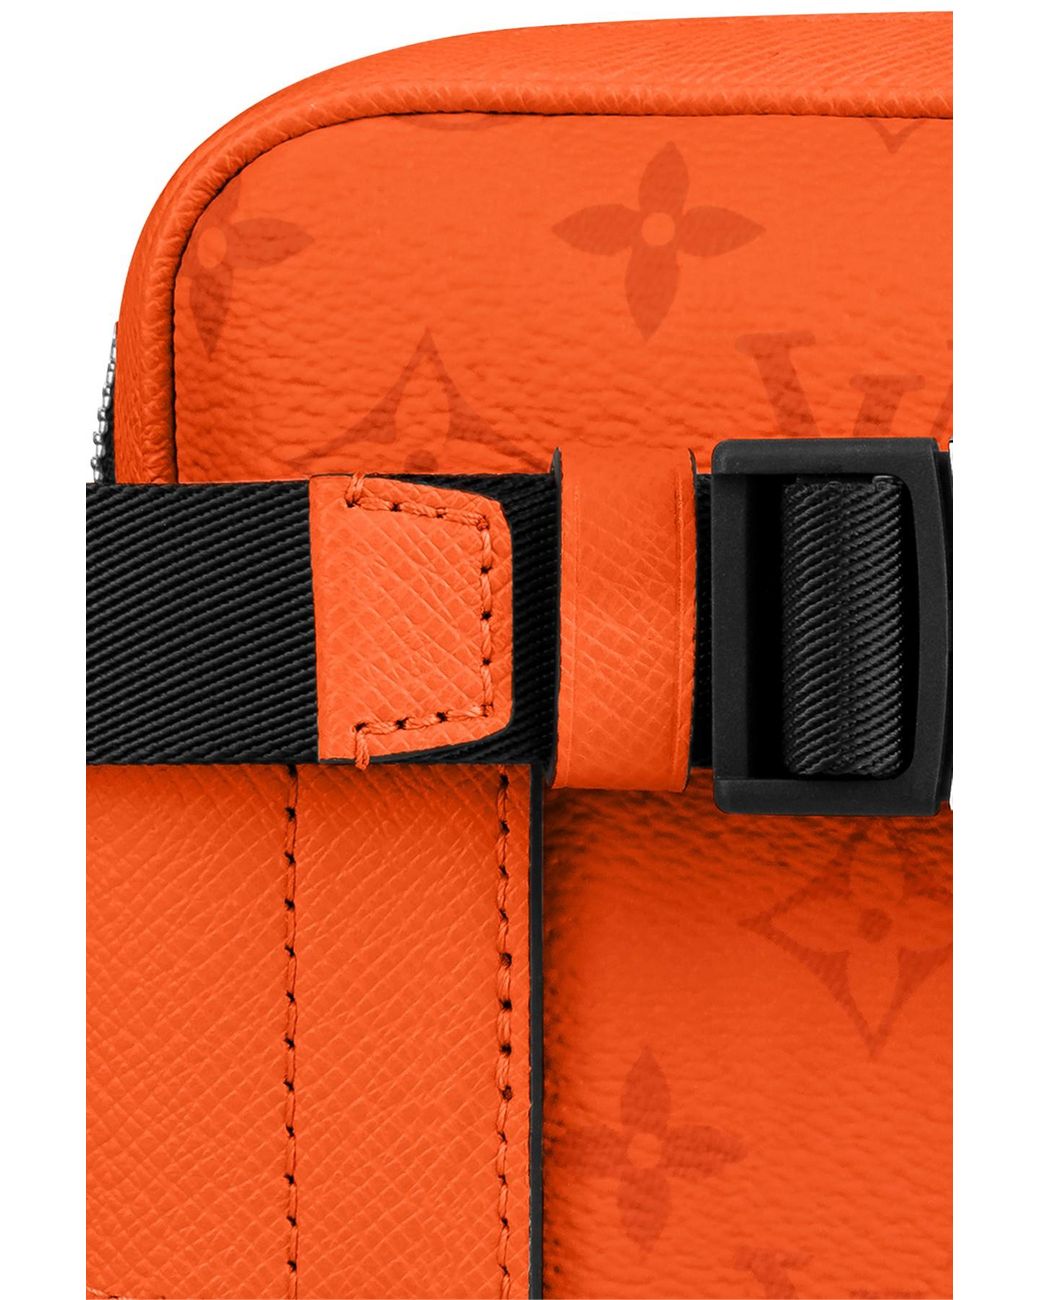 Orange Outdoor Bumbag - Was The Last One In-Stores in the Western  Hemisphere! : r/Louisvuitton